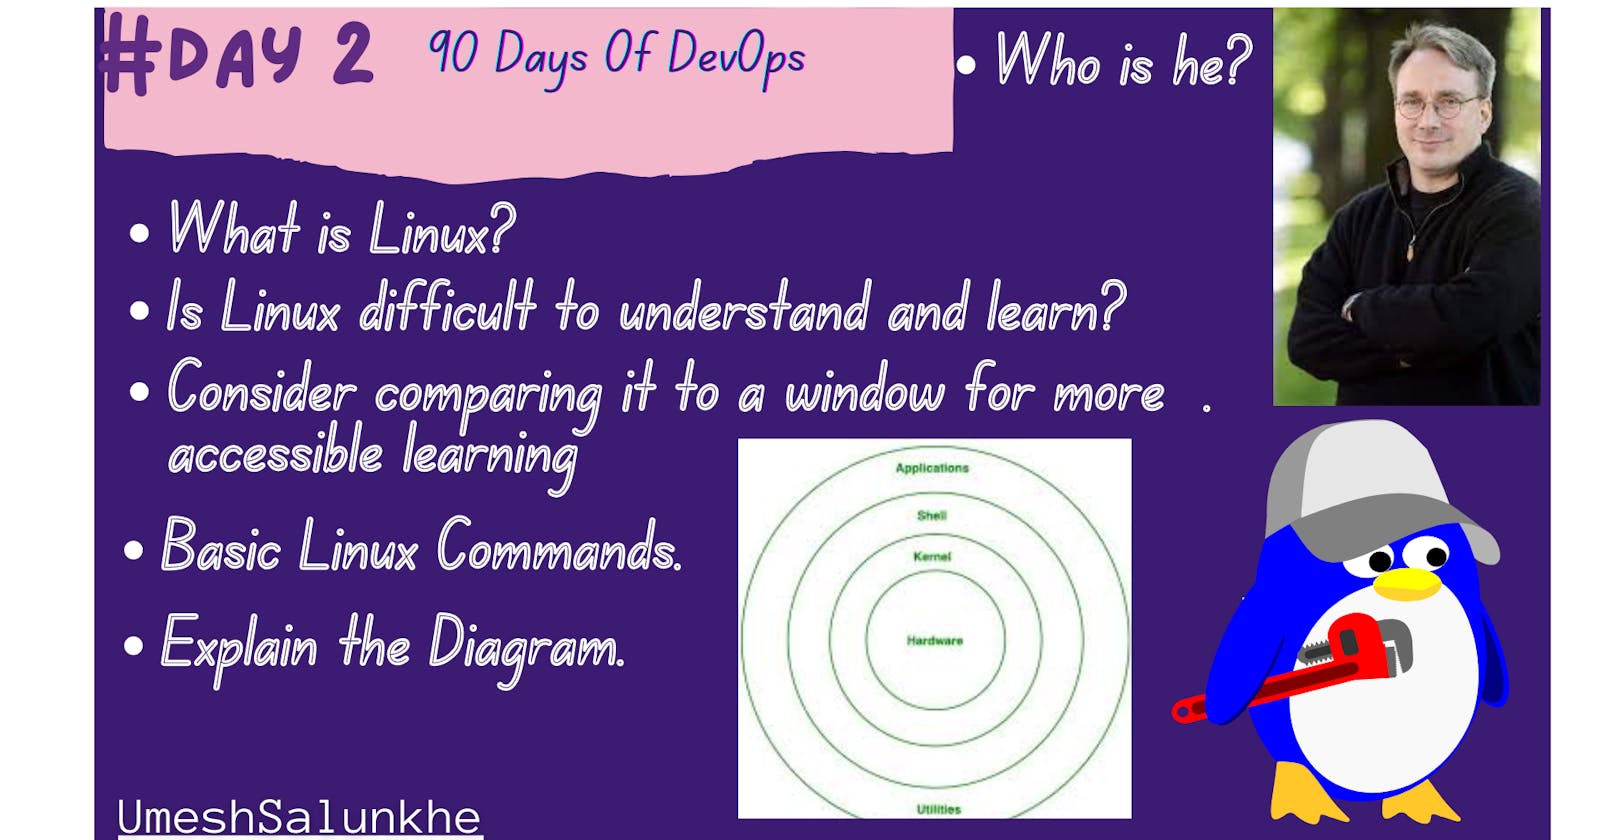 #Day 2 of 90 Days of DevOps Discoveries! 🚀